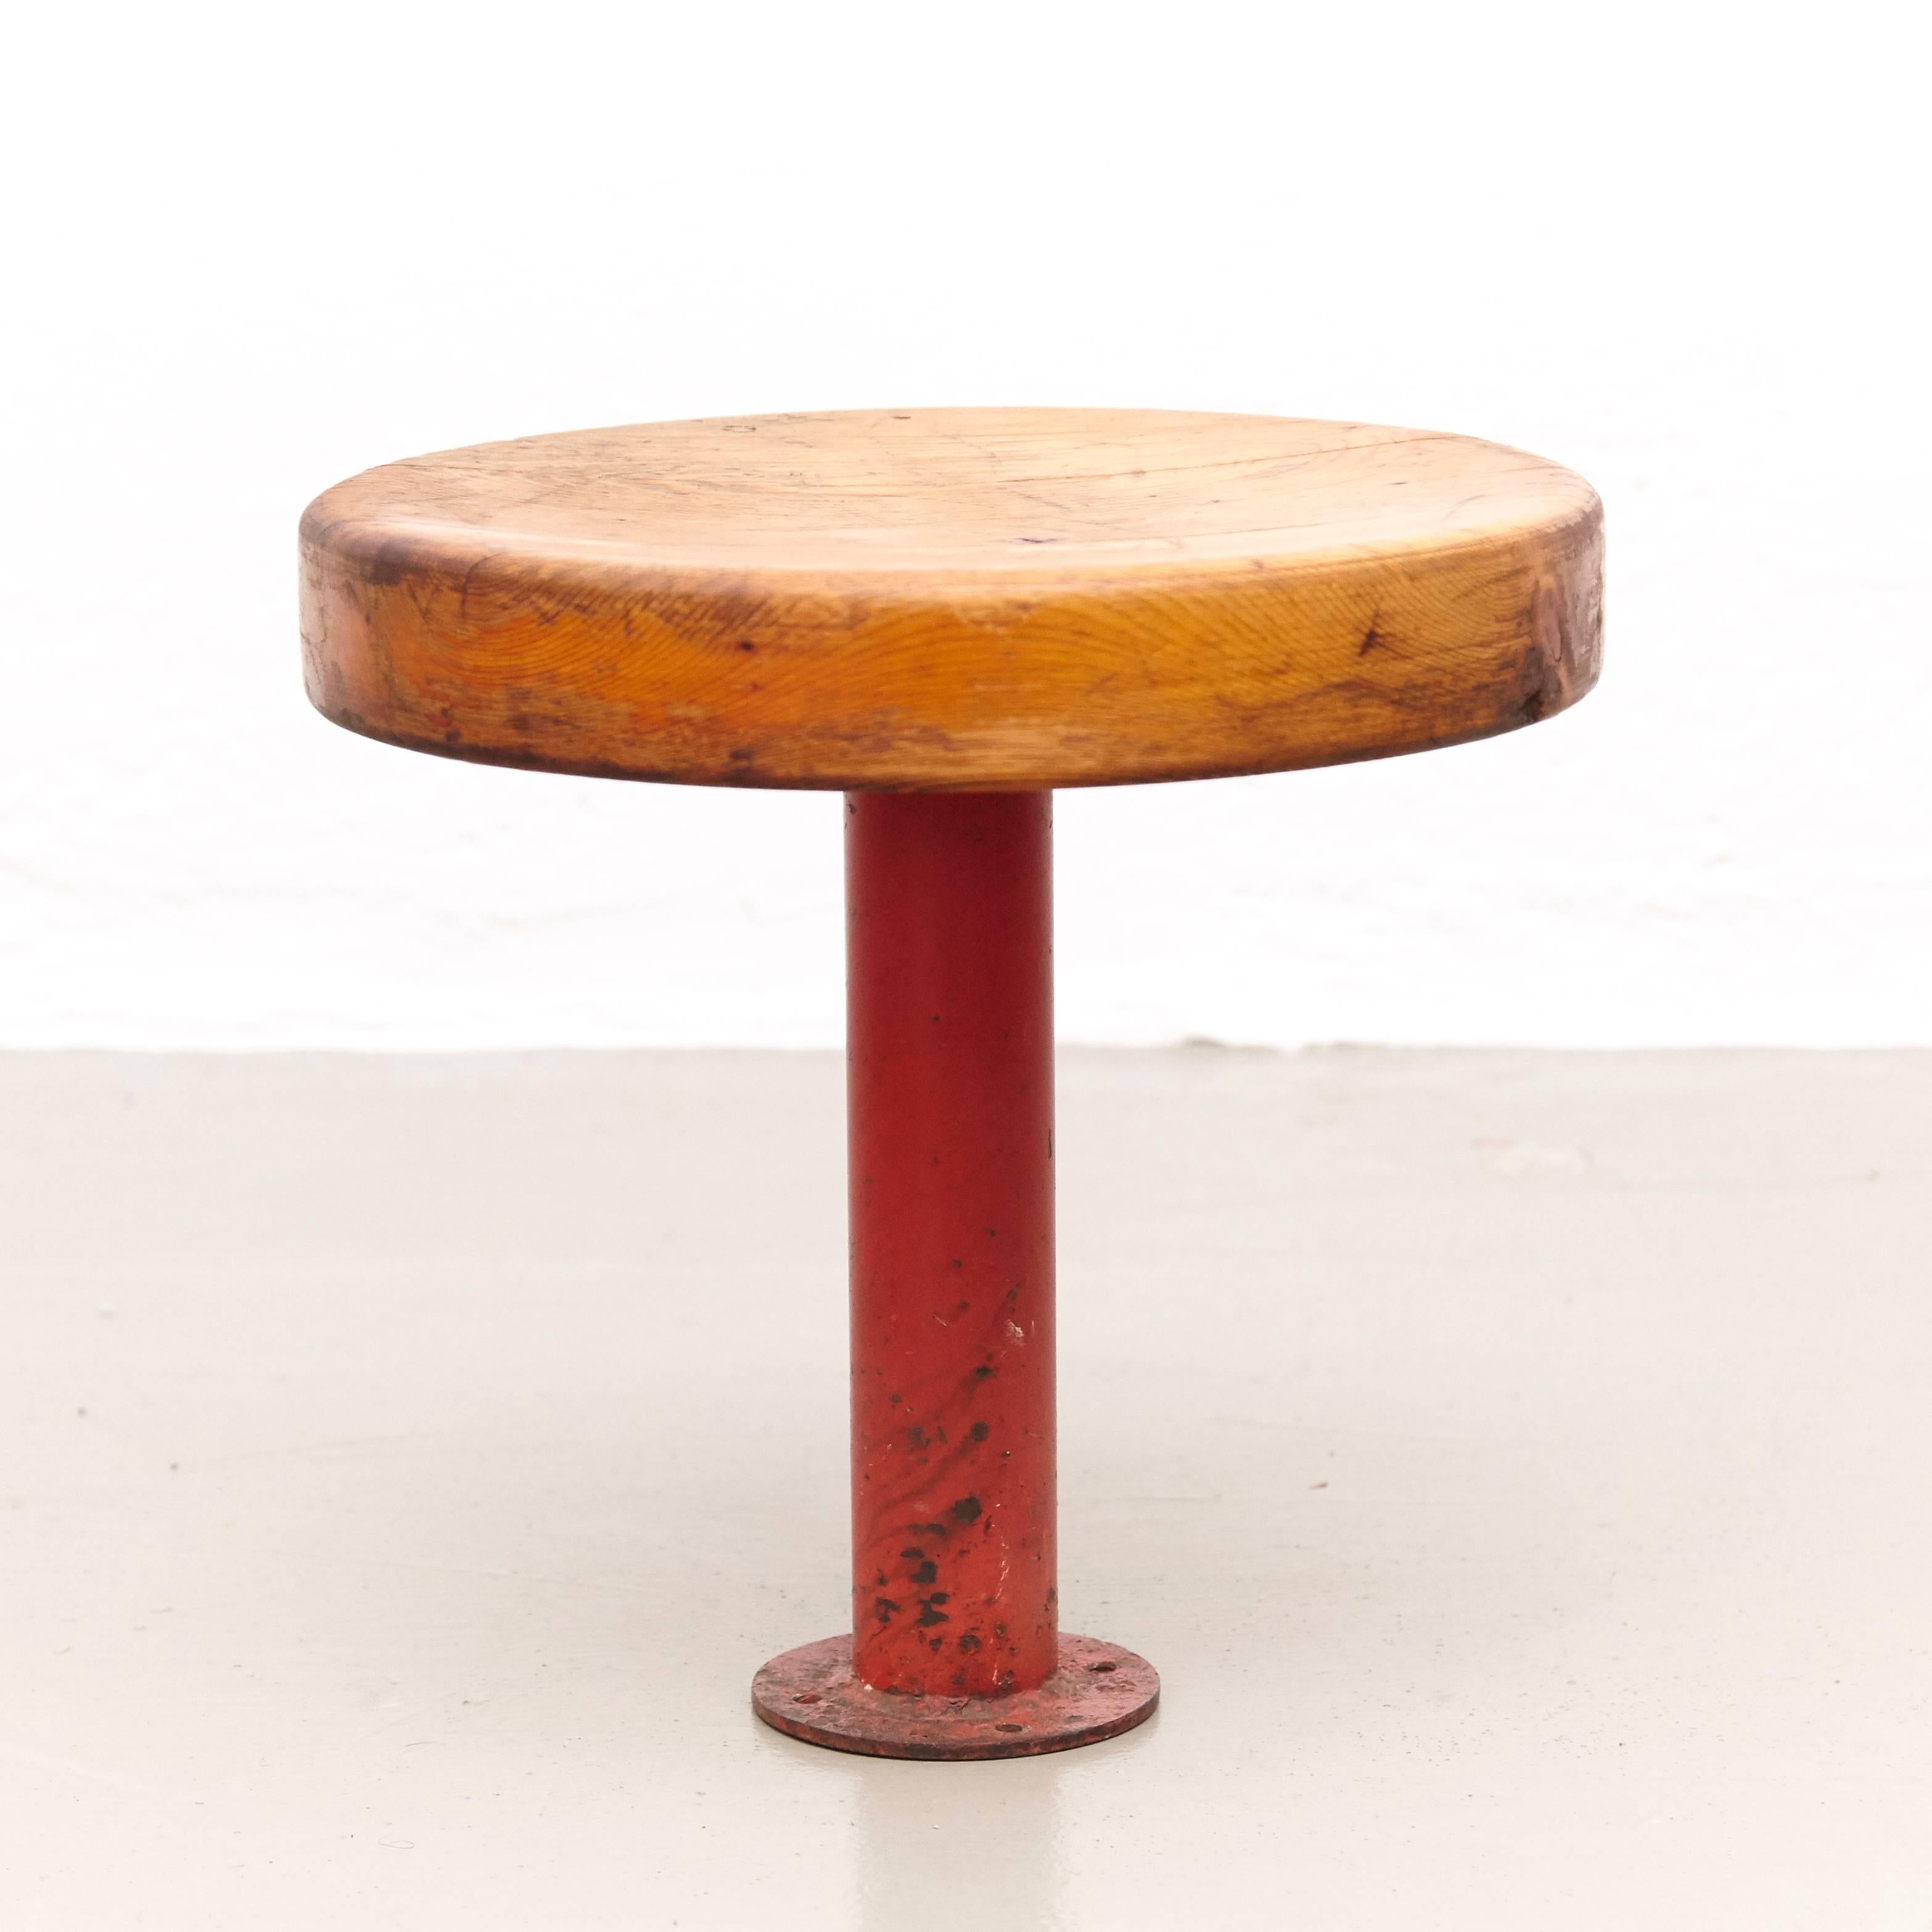 Rare stools designed by Charlotte Perriand circa 1960 for Les Arcs.
Manufactured in France.
Lacquered metal base, pinewood seat.

In good original condition, preserving a beautifull patina.

Charlotte Perriand (1903-1999) She was born in Paris